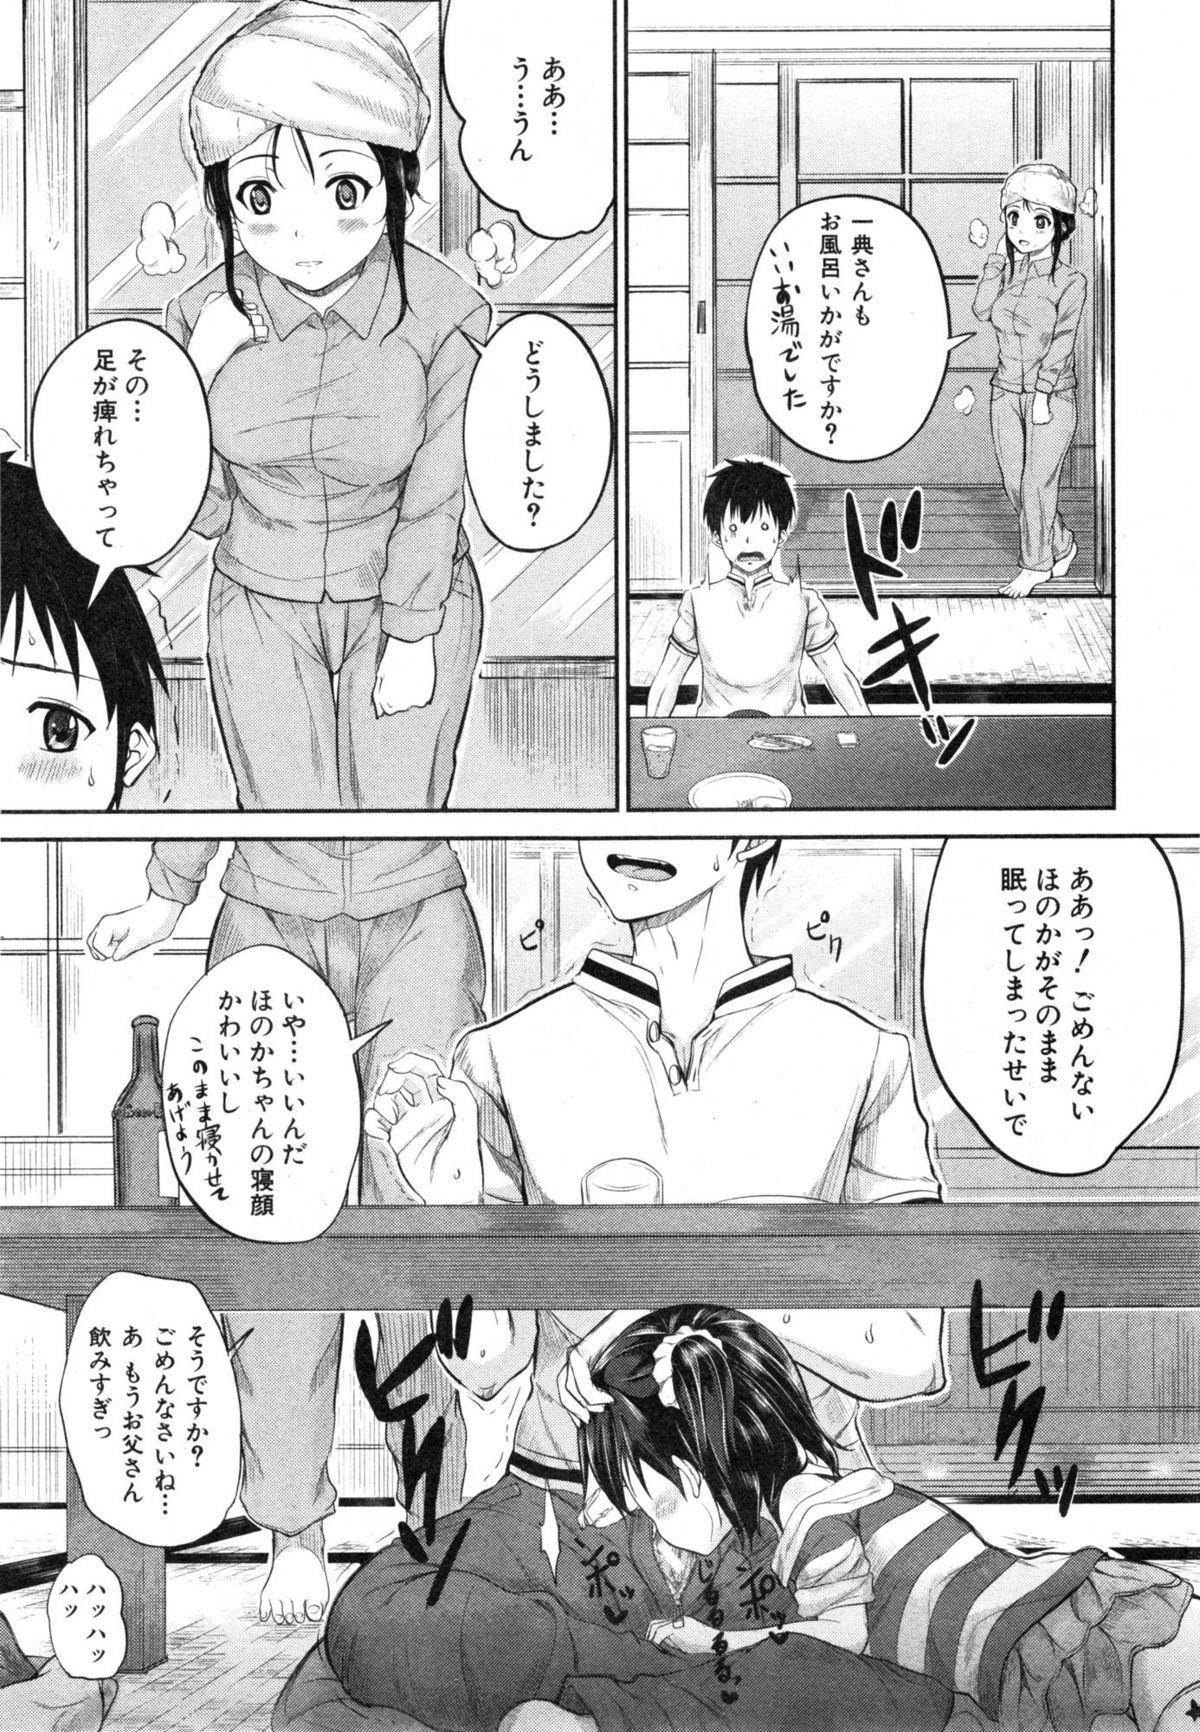 BUSTER COMIC 2015-01 156